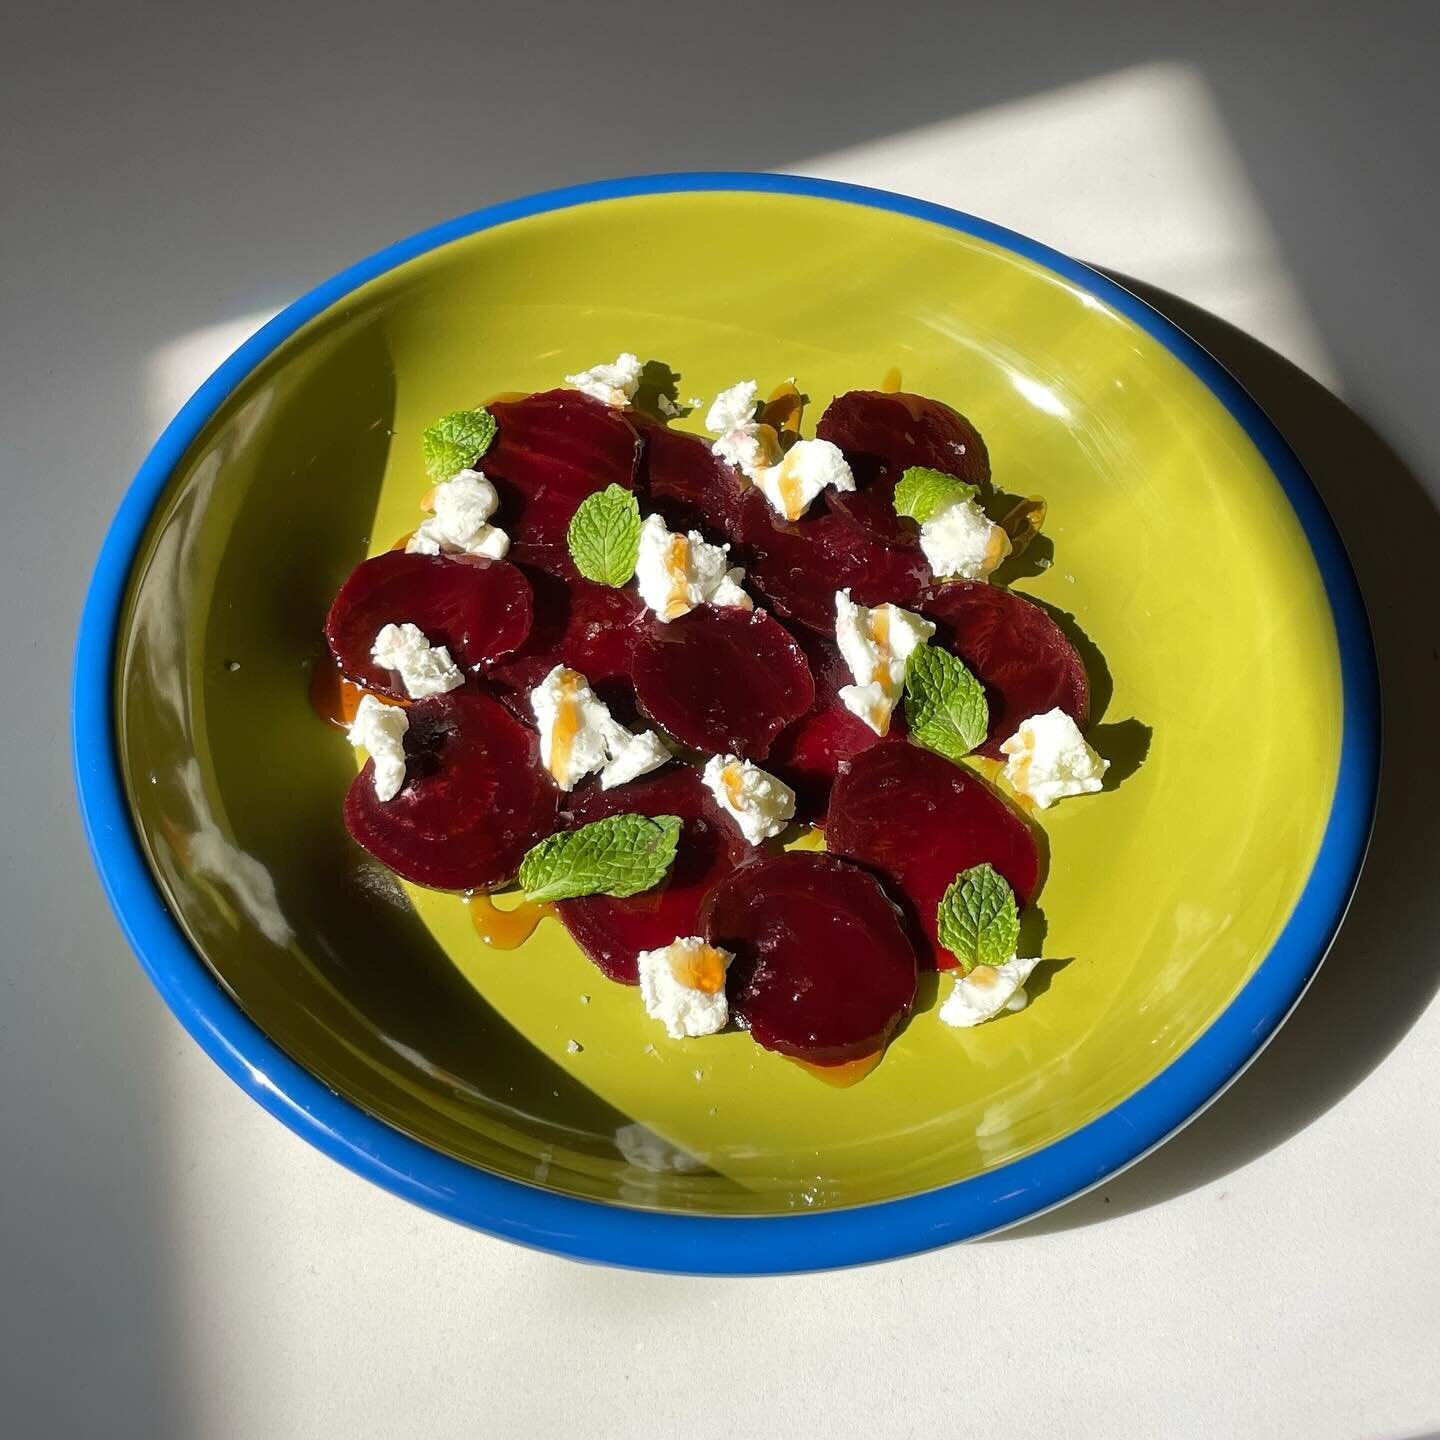 Every year I try to give beets a shot and every year I remember that I don't like them! They taste like dirt! Anyway... sliced beets, globs of goat cheese, mint, and a drizzle of hot honey